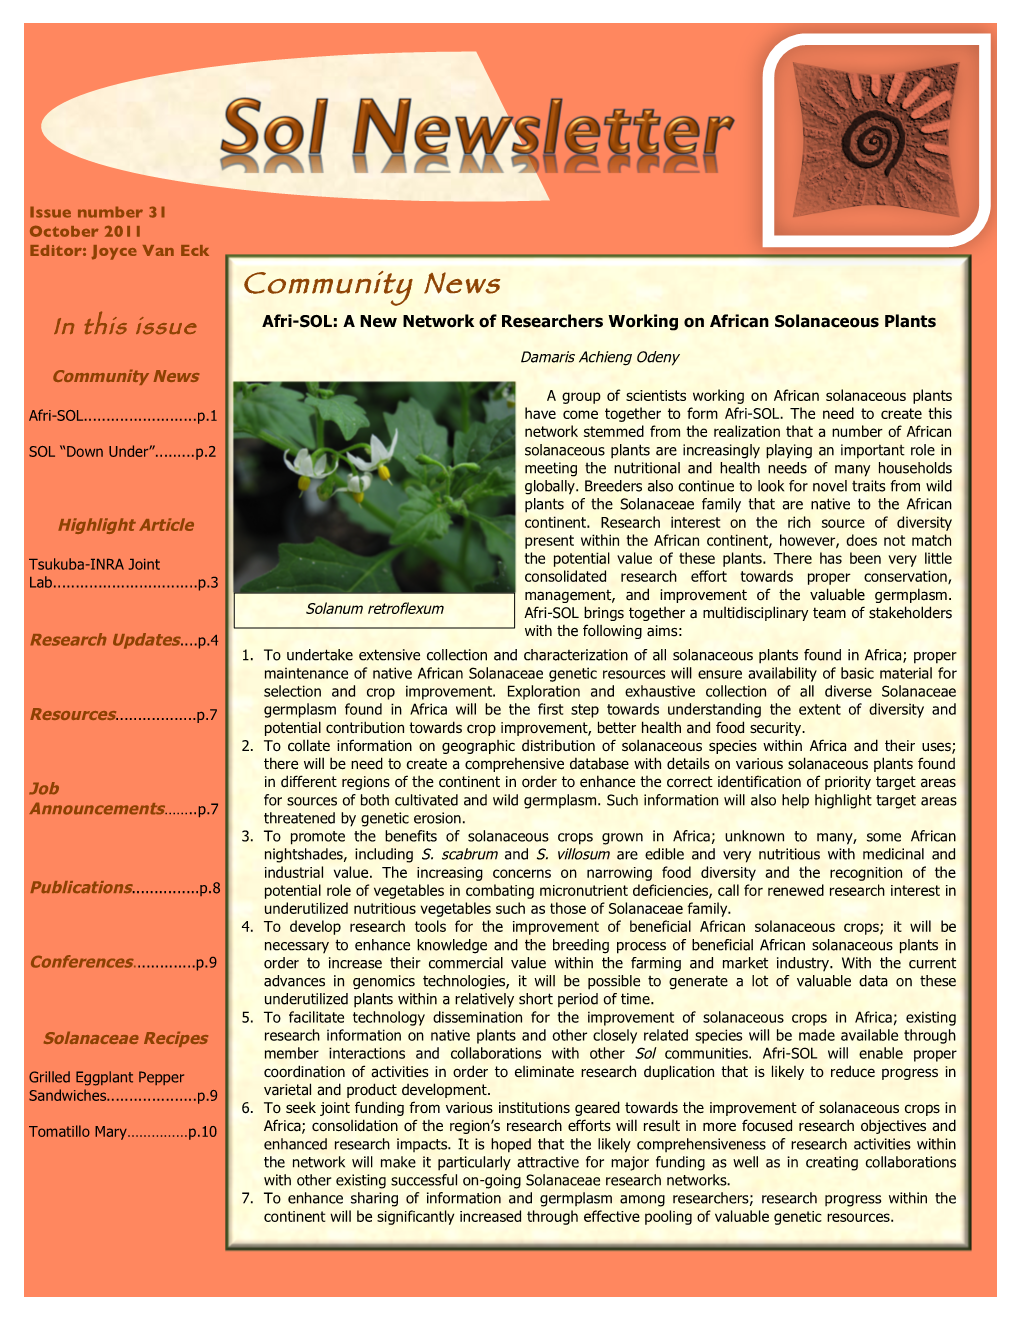 1St Page Oct 2011 Newsletter